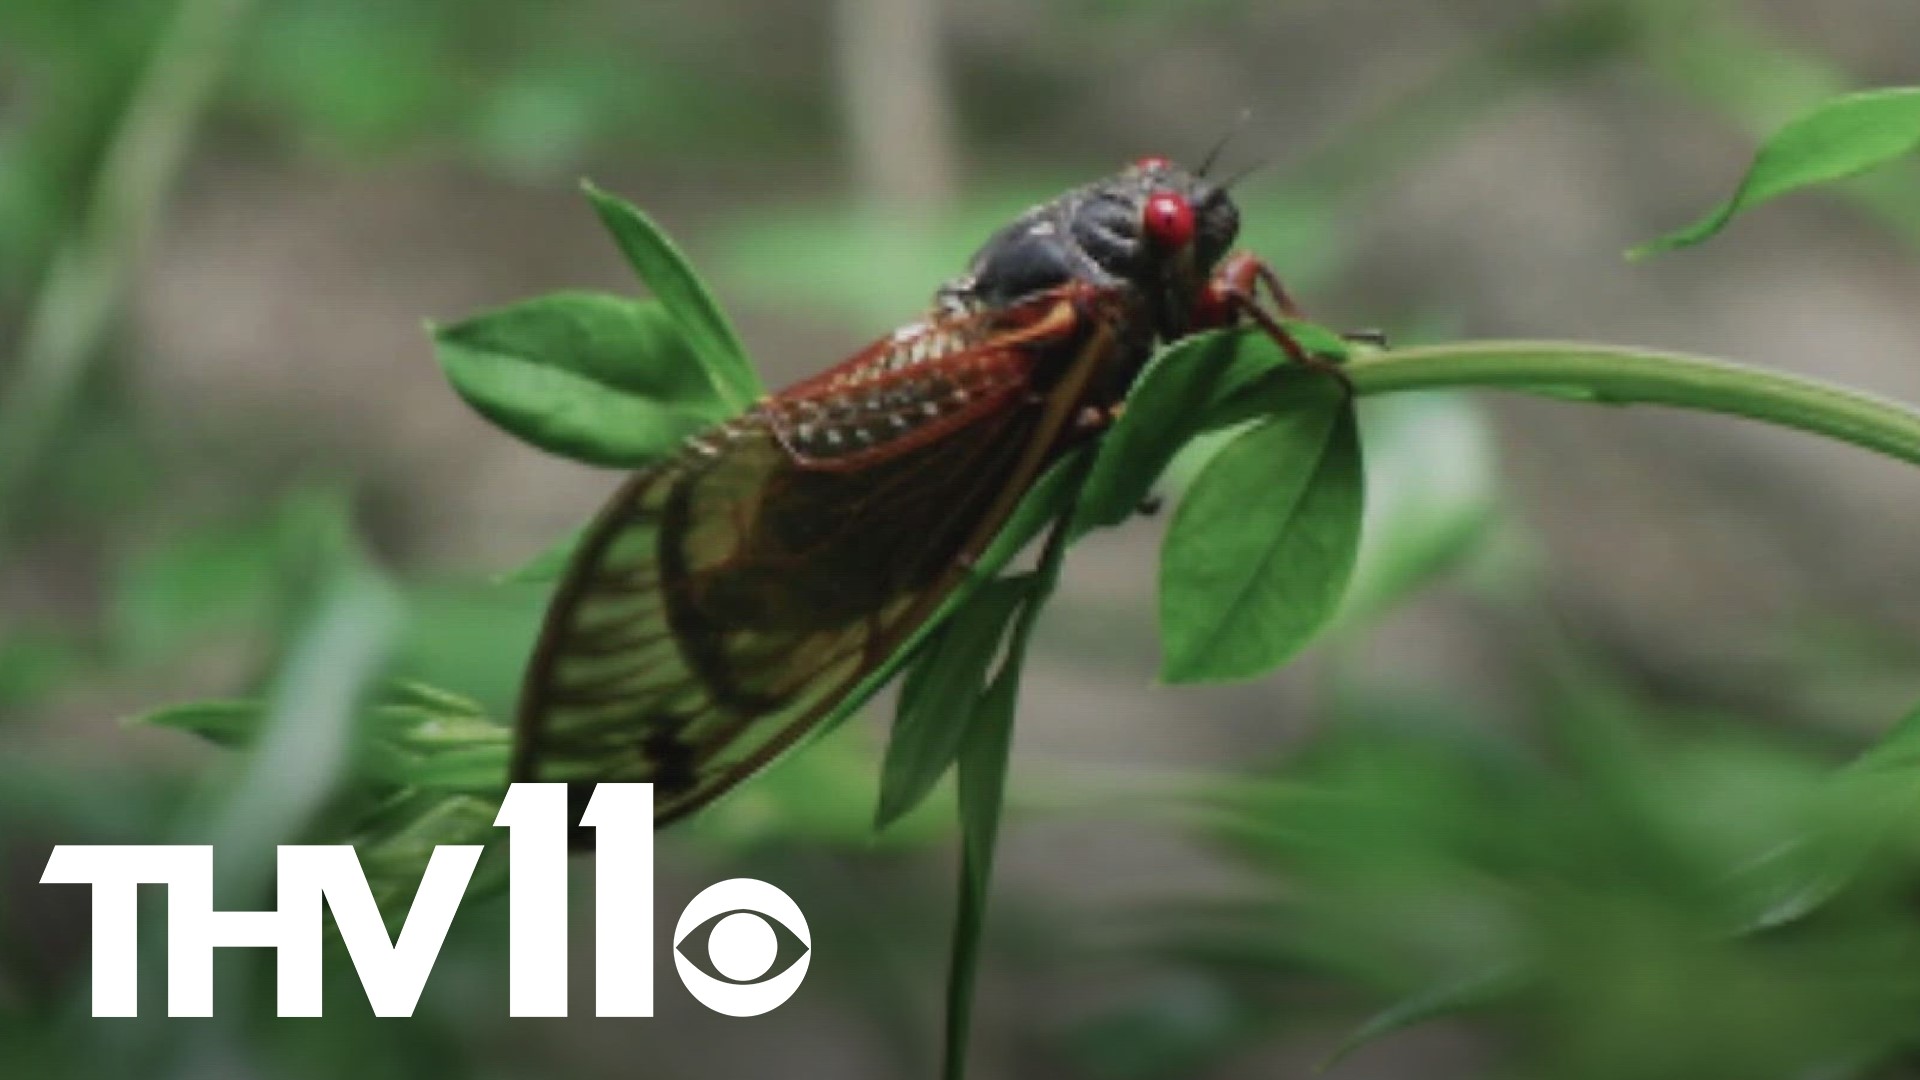 After more than a decade, flying singing cicadas will soon make a reappearance and make history— here's when the invasion is expected to arrive.